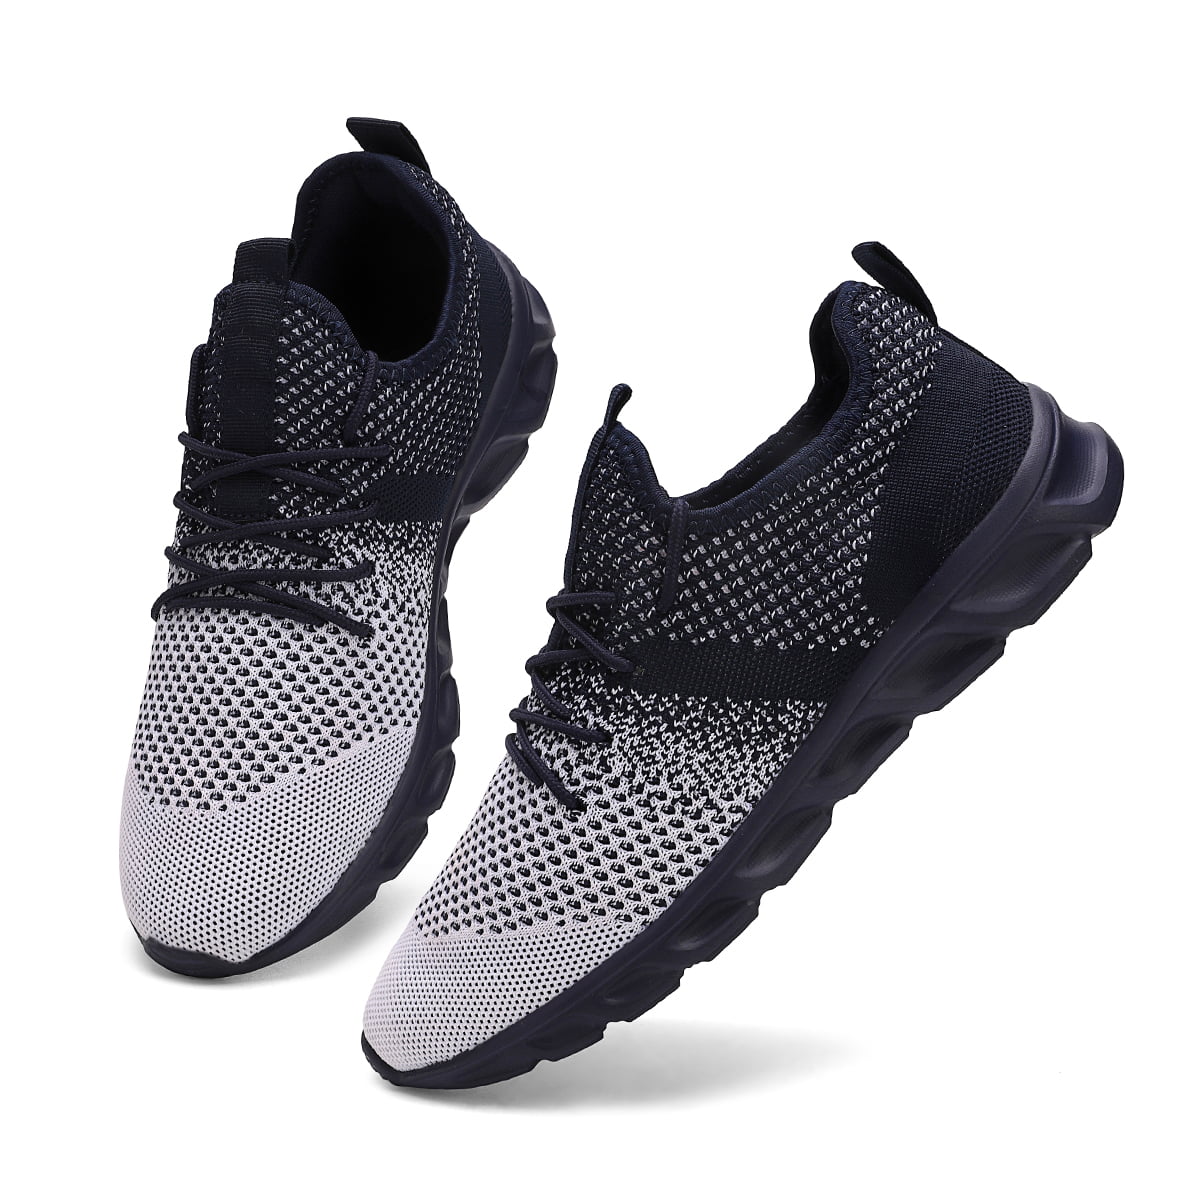 Men's Fashion Running Breathable Shoes Sports Casual Walking Athletic Sneakers# 